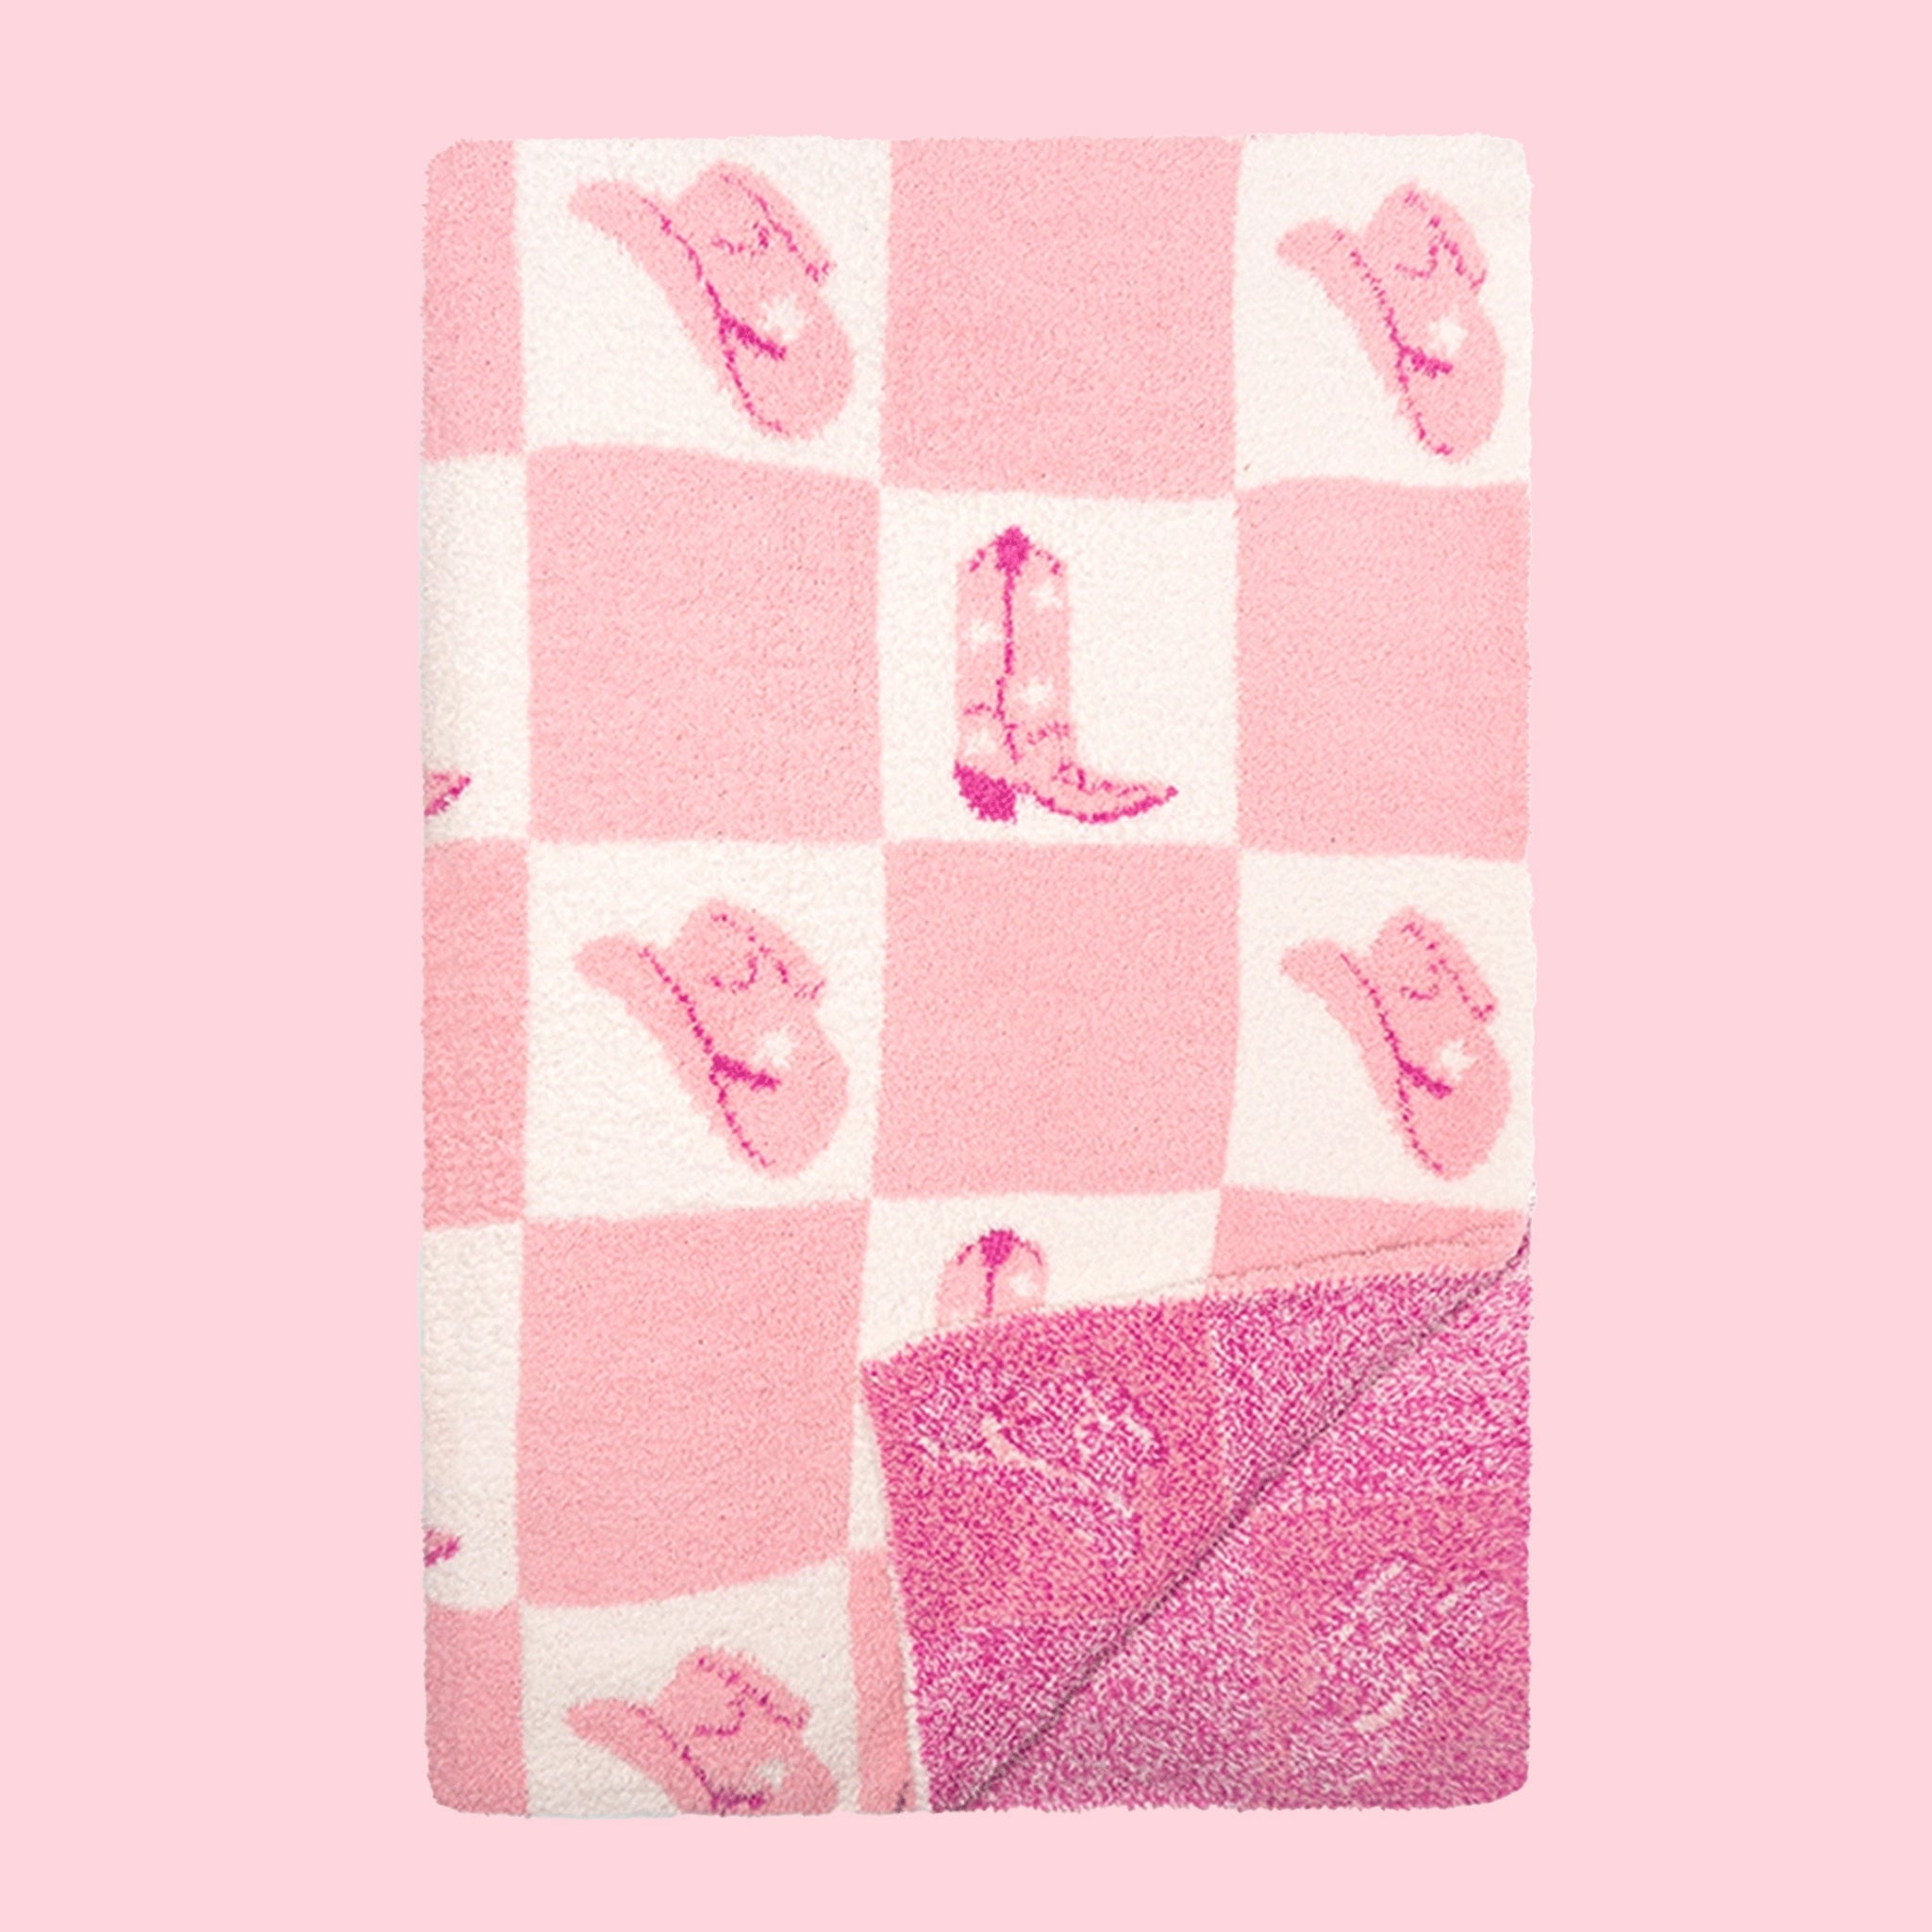 On a pink background is a folded pink and white checkered blanket with alternating pink cowgirl hats and cowgirl boots in each white square.